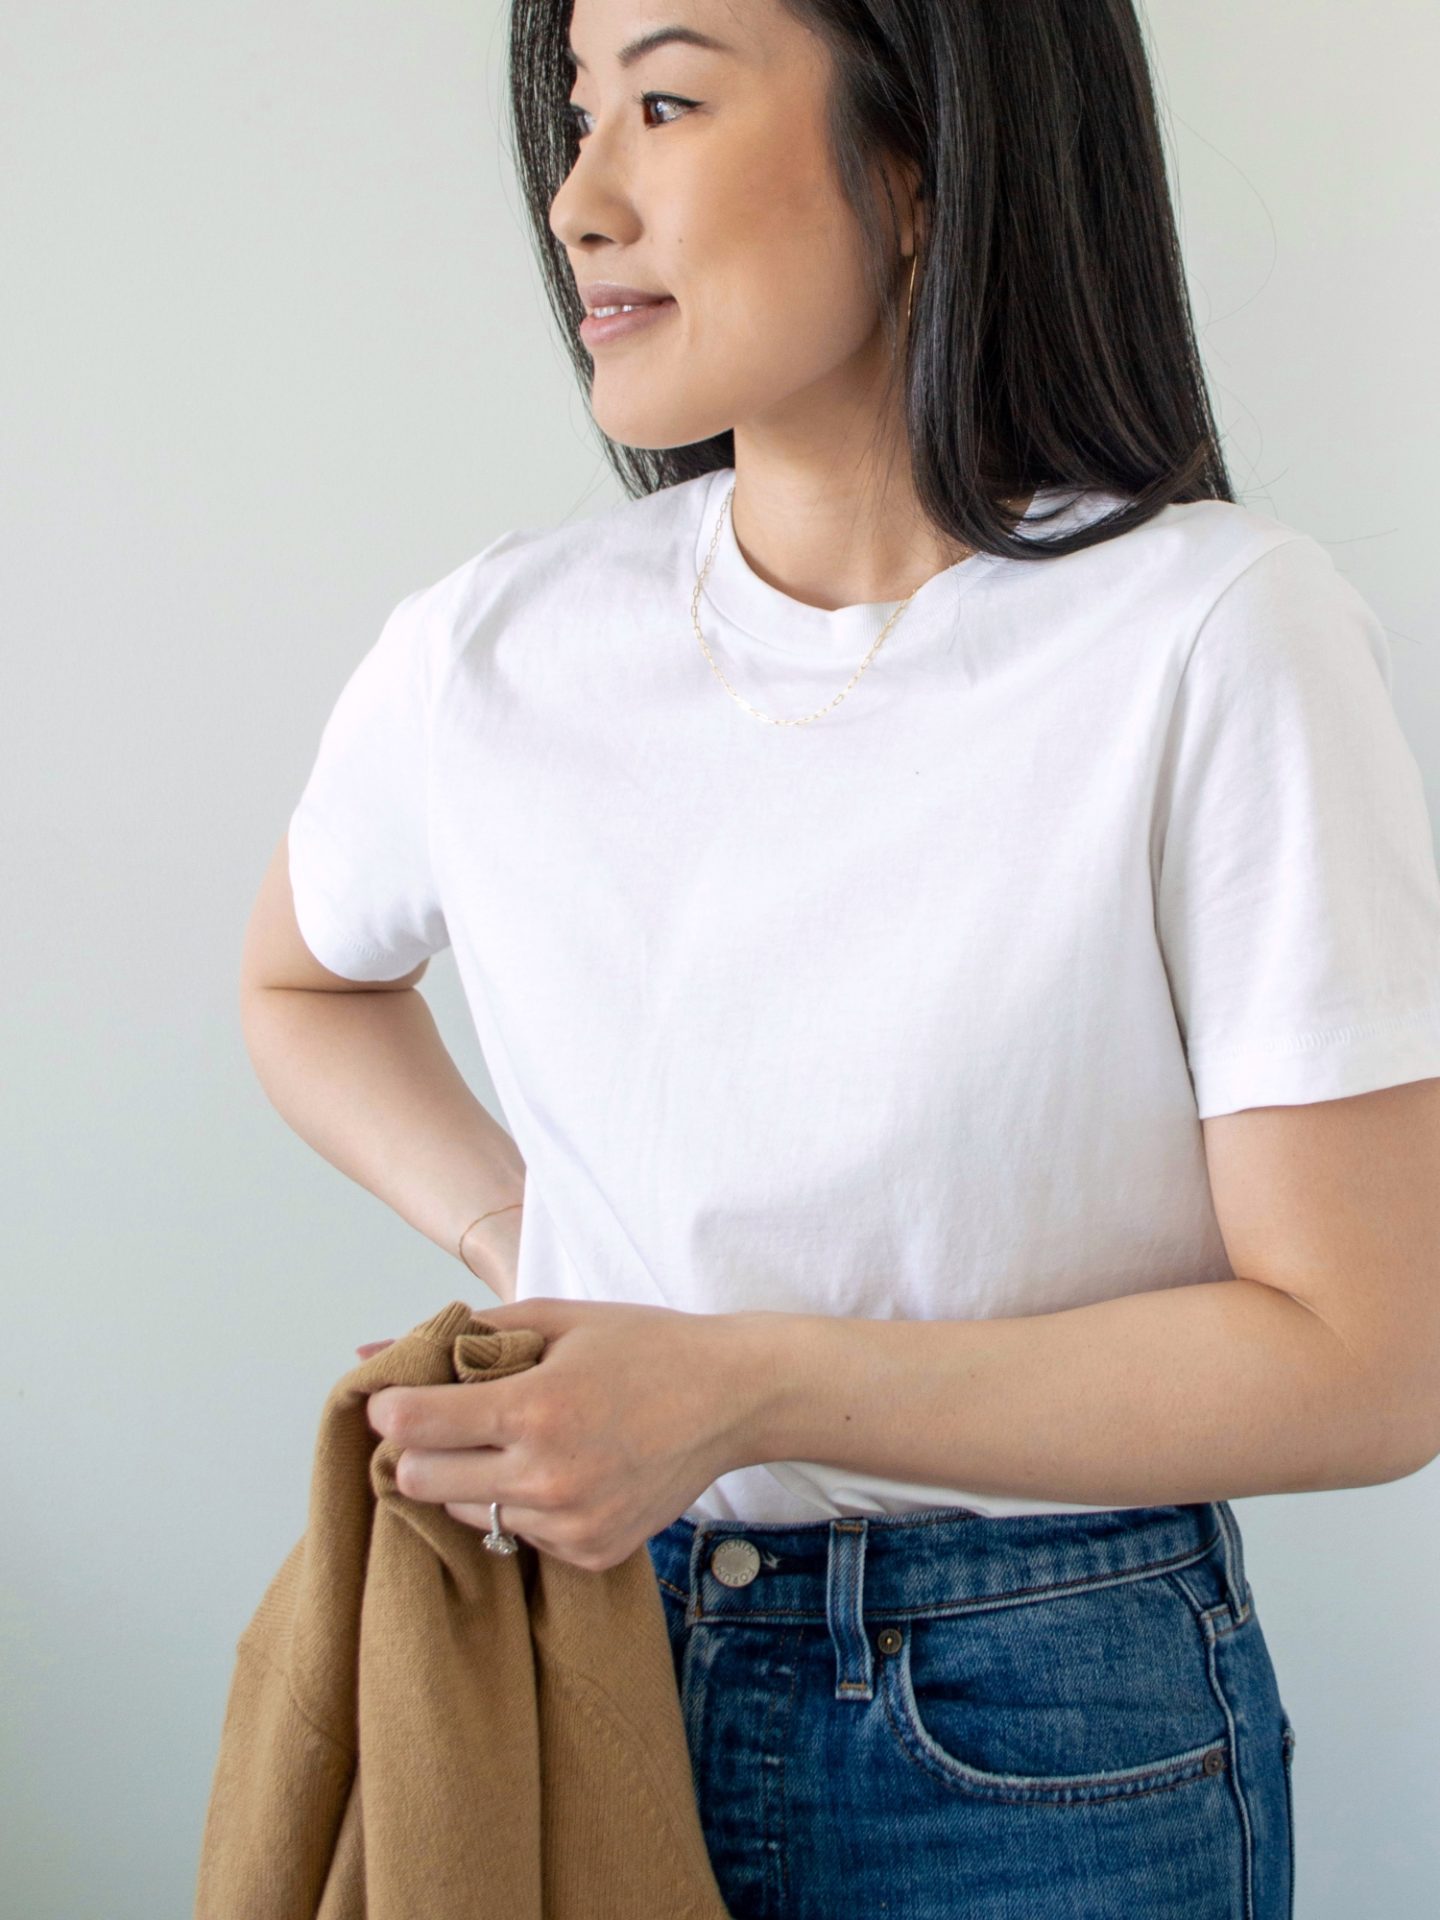 Her Simple Sole - wearing Sheena Marshall Jewelry. Delicate gold jewelry. White crewneck t-shirt, Everlane cashmere crew in camel, cashmere sweater